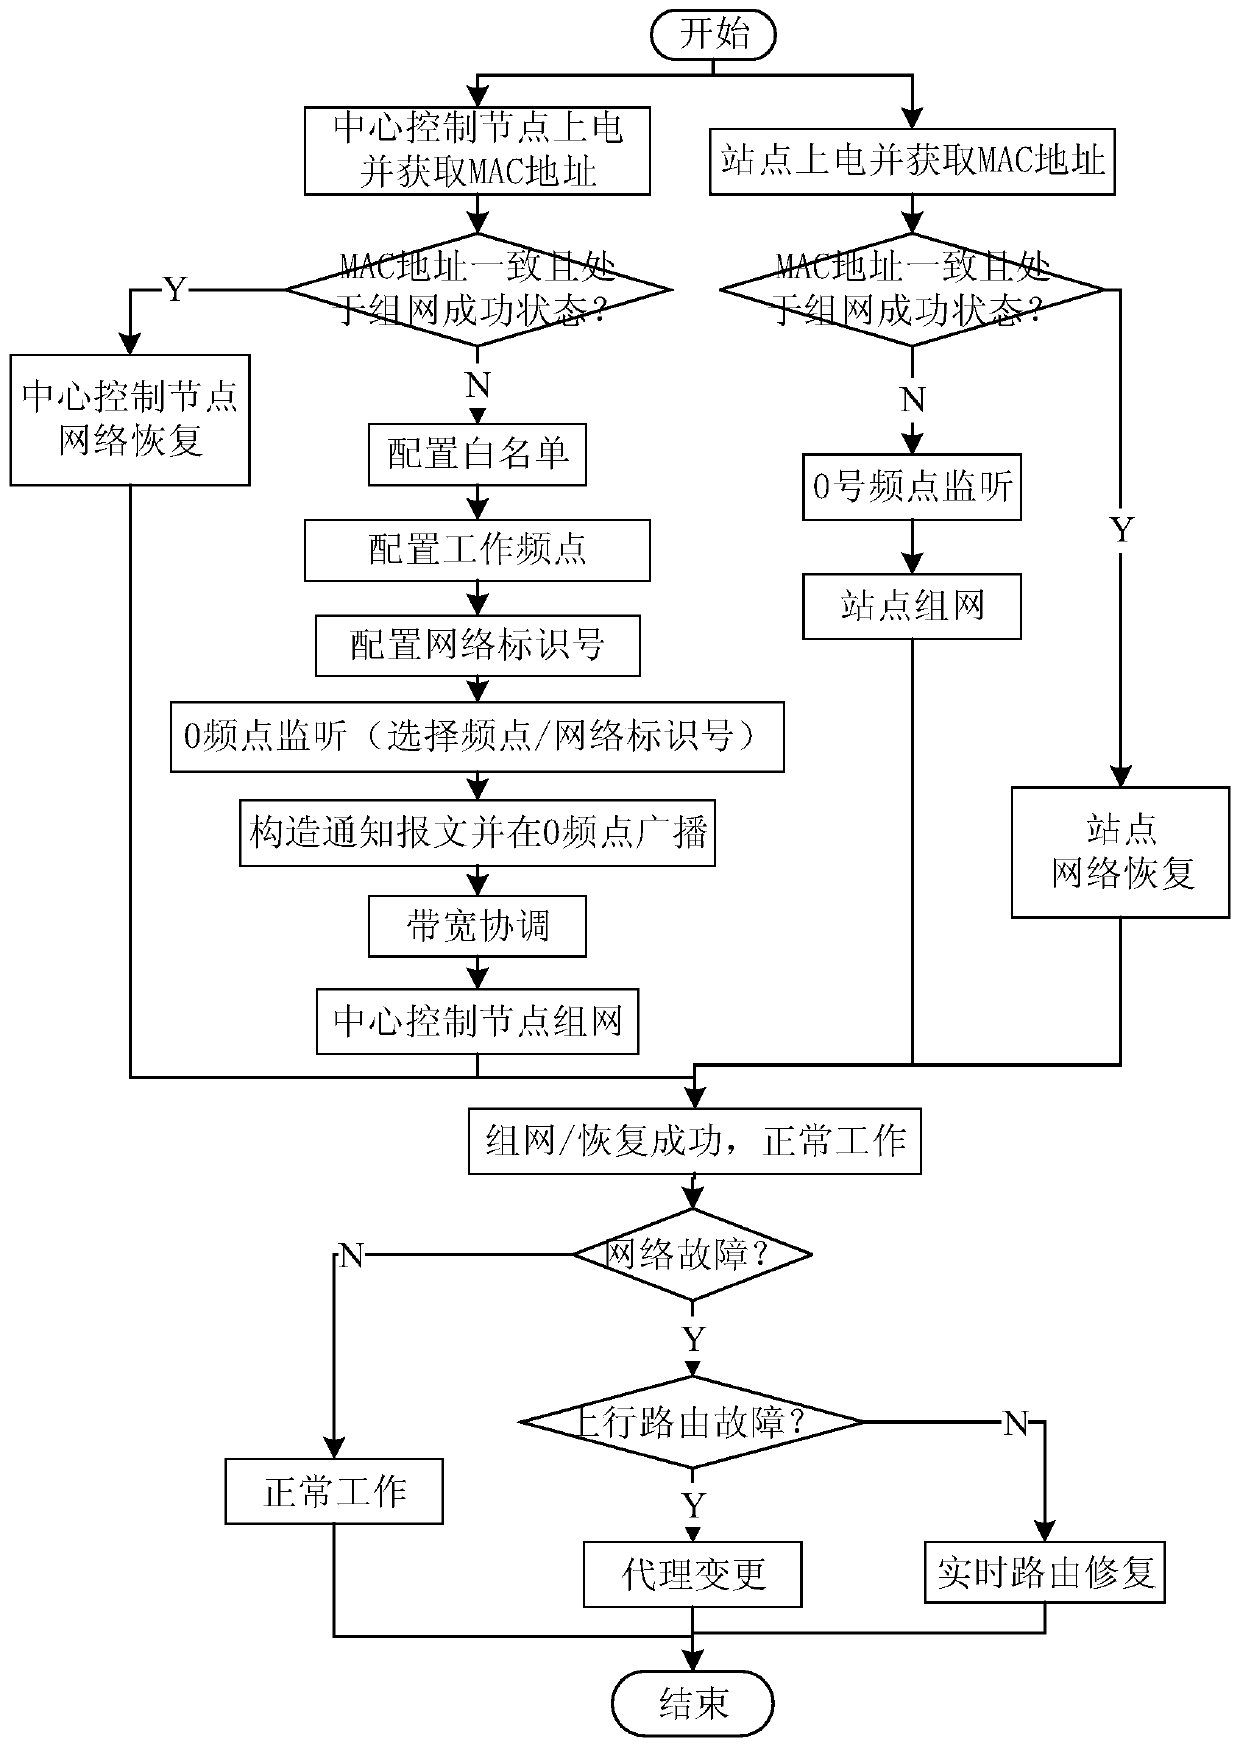 Multi-network coexistence multi-frequency-point wireless communication networking method